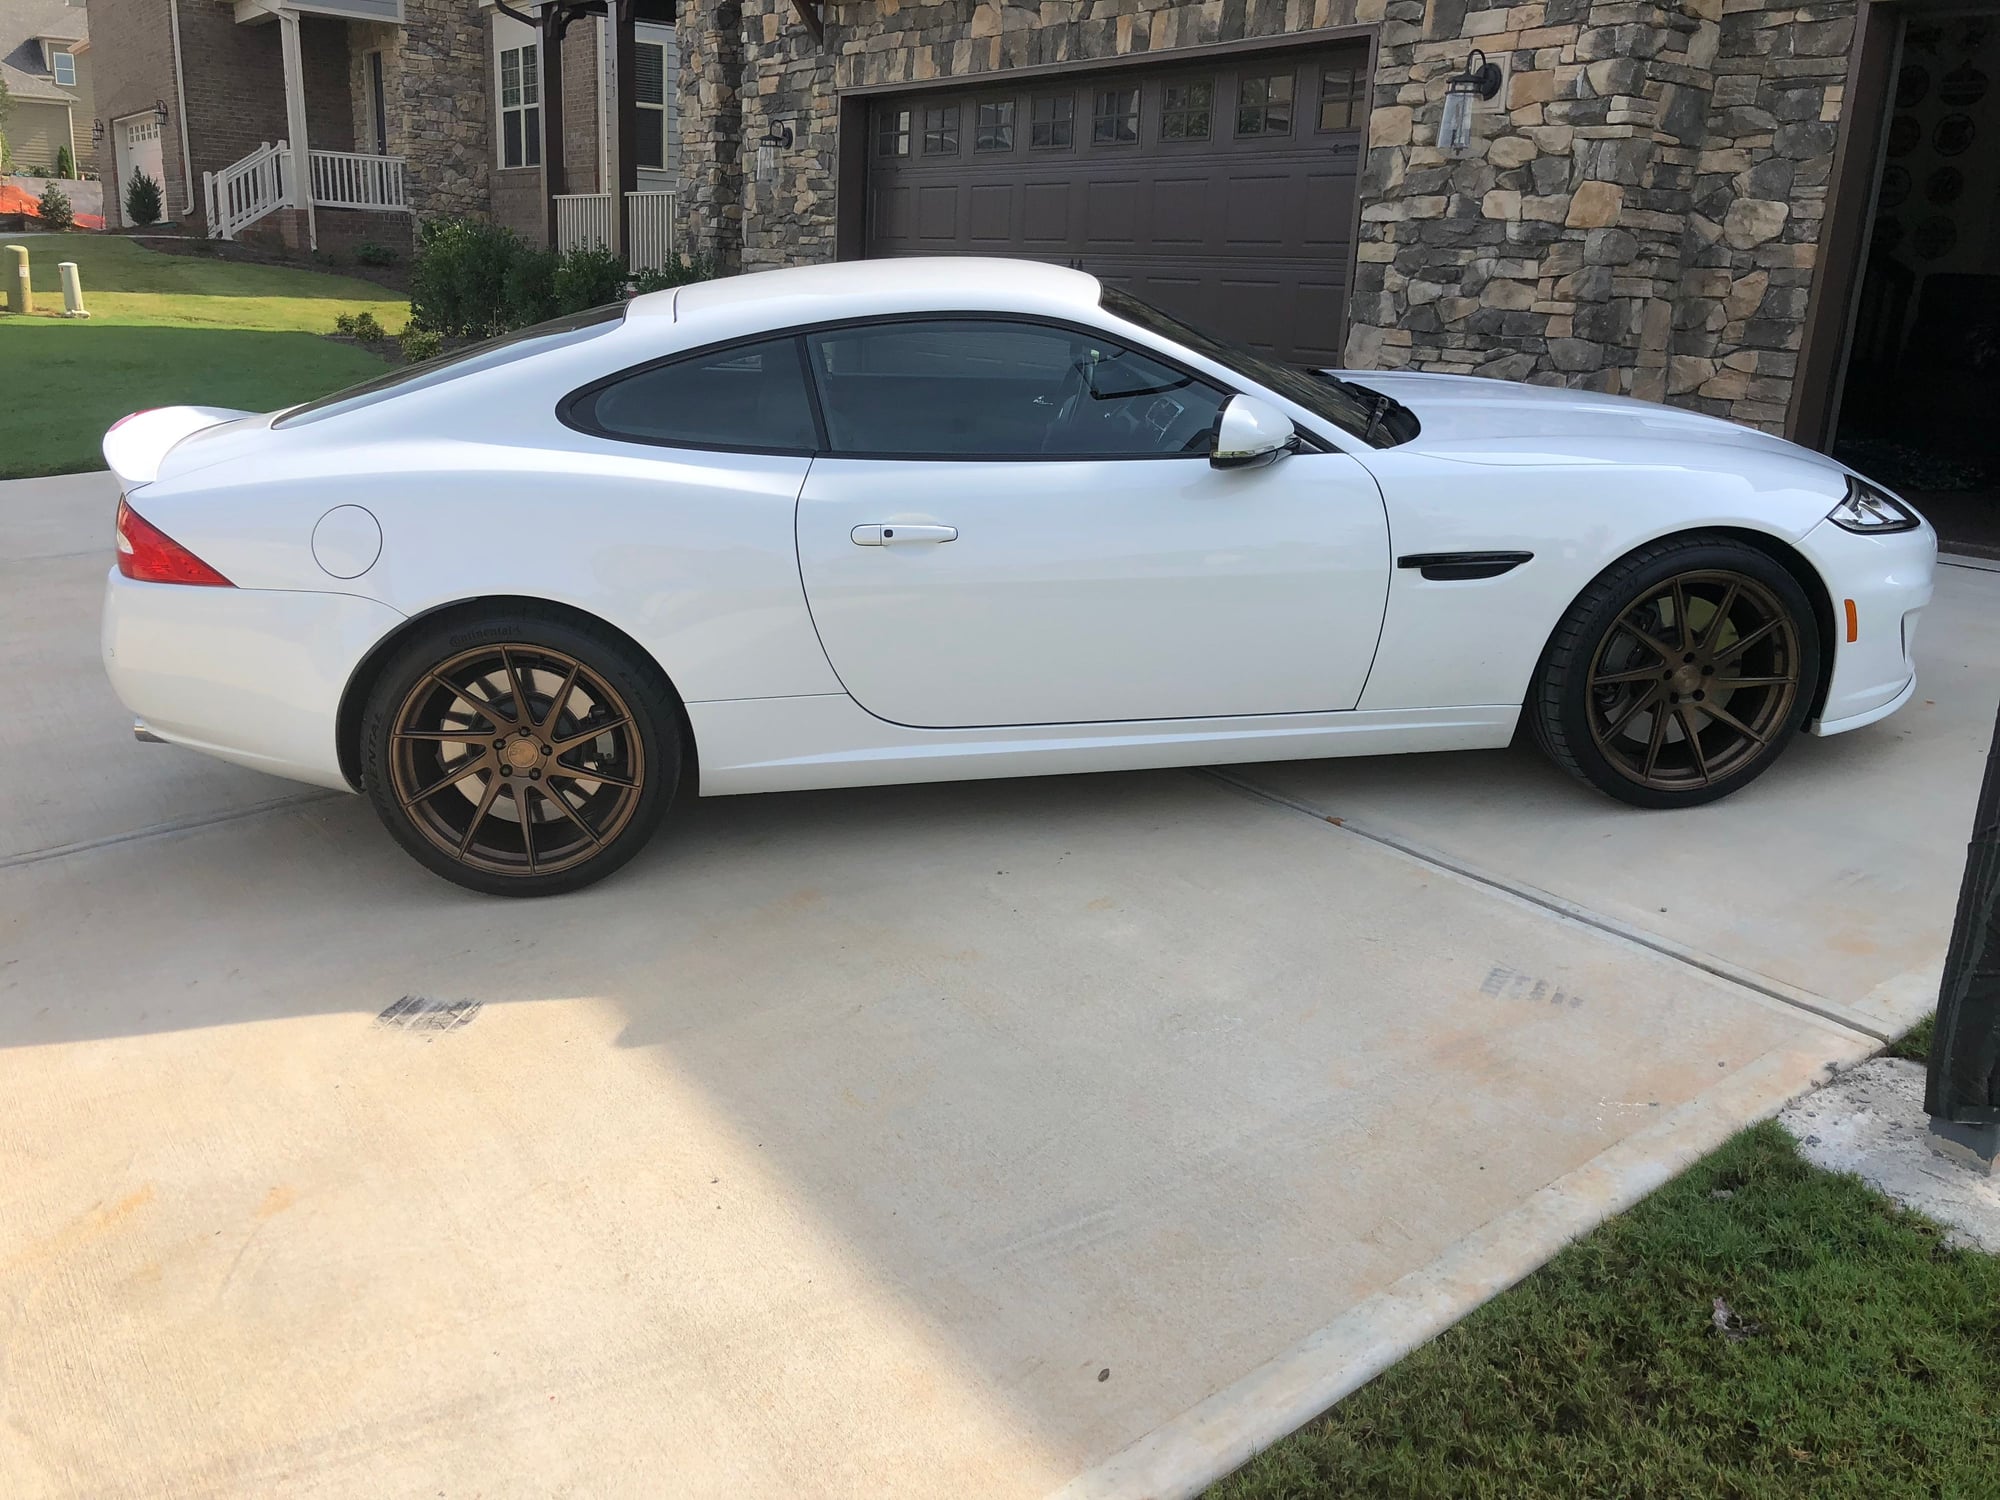 Wheels and Tires/Axles - Avant-garde rims - Used - 2011 to 2014 Jaguar XKR - Fort Mill, SC 29715, United States